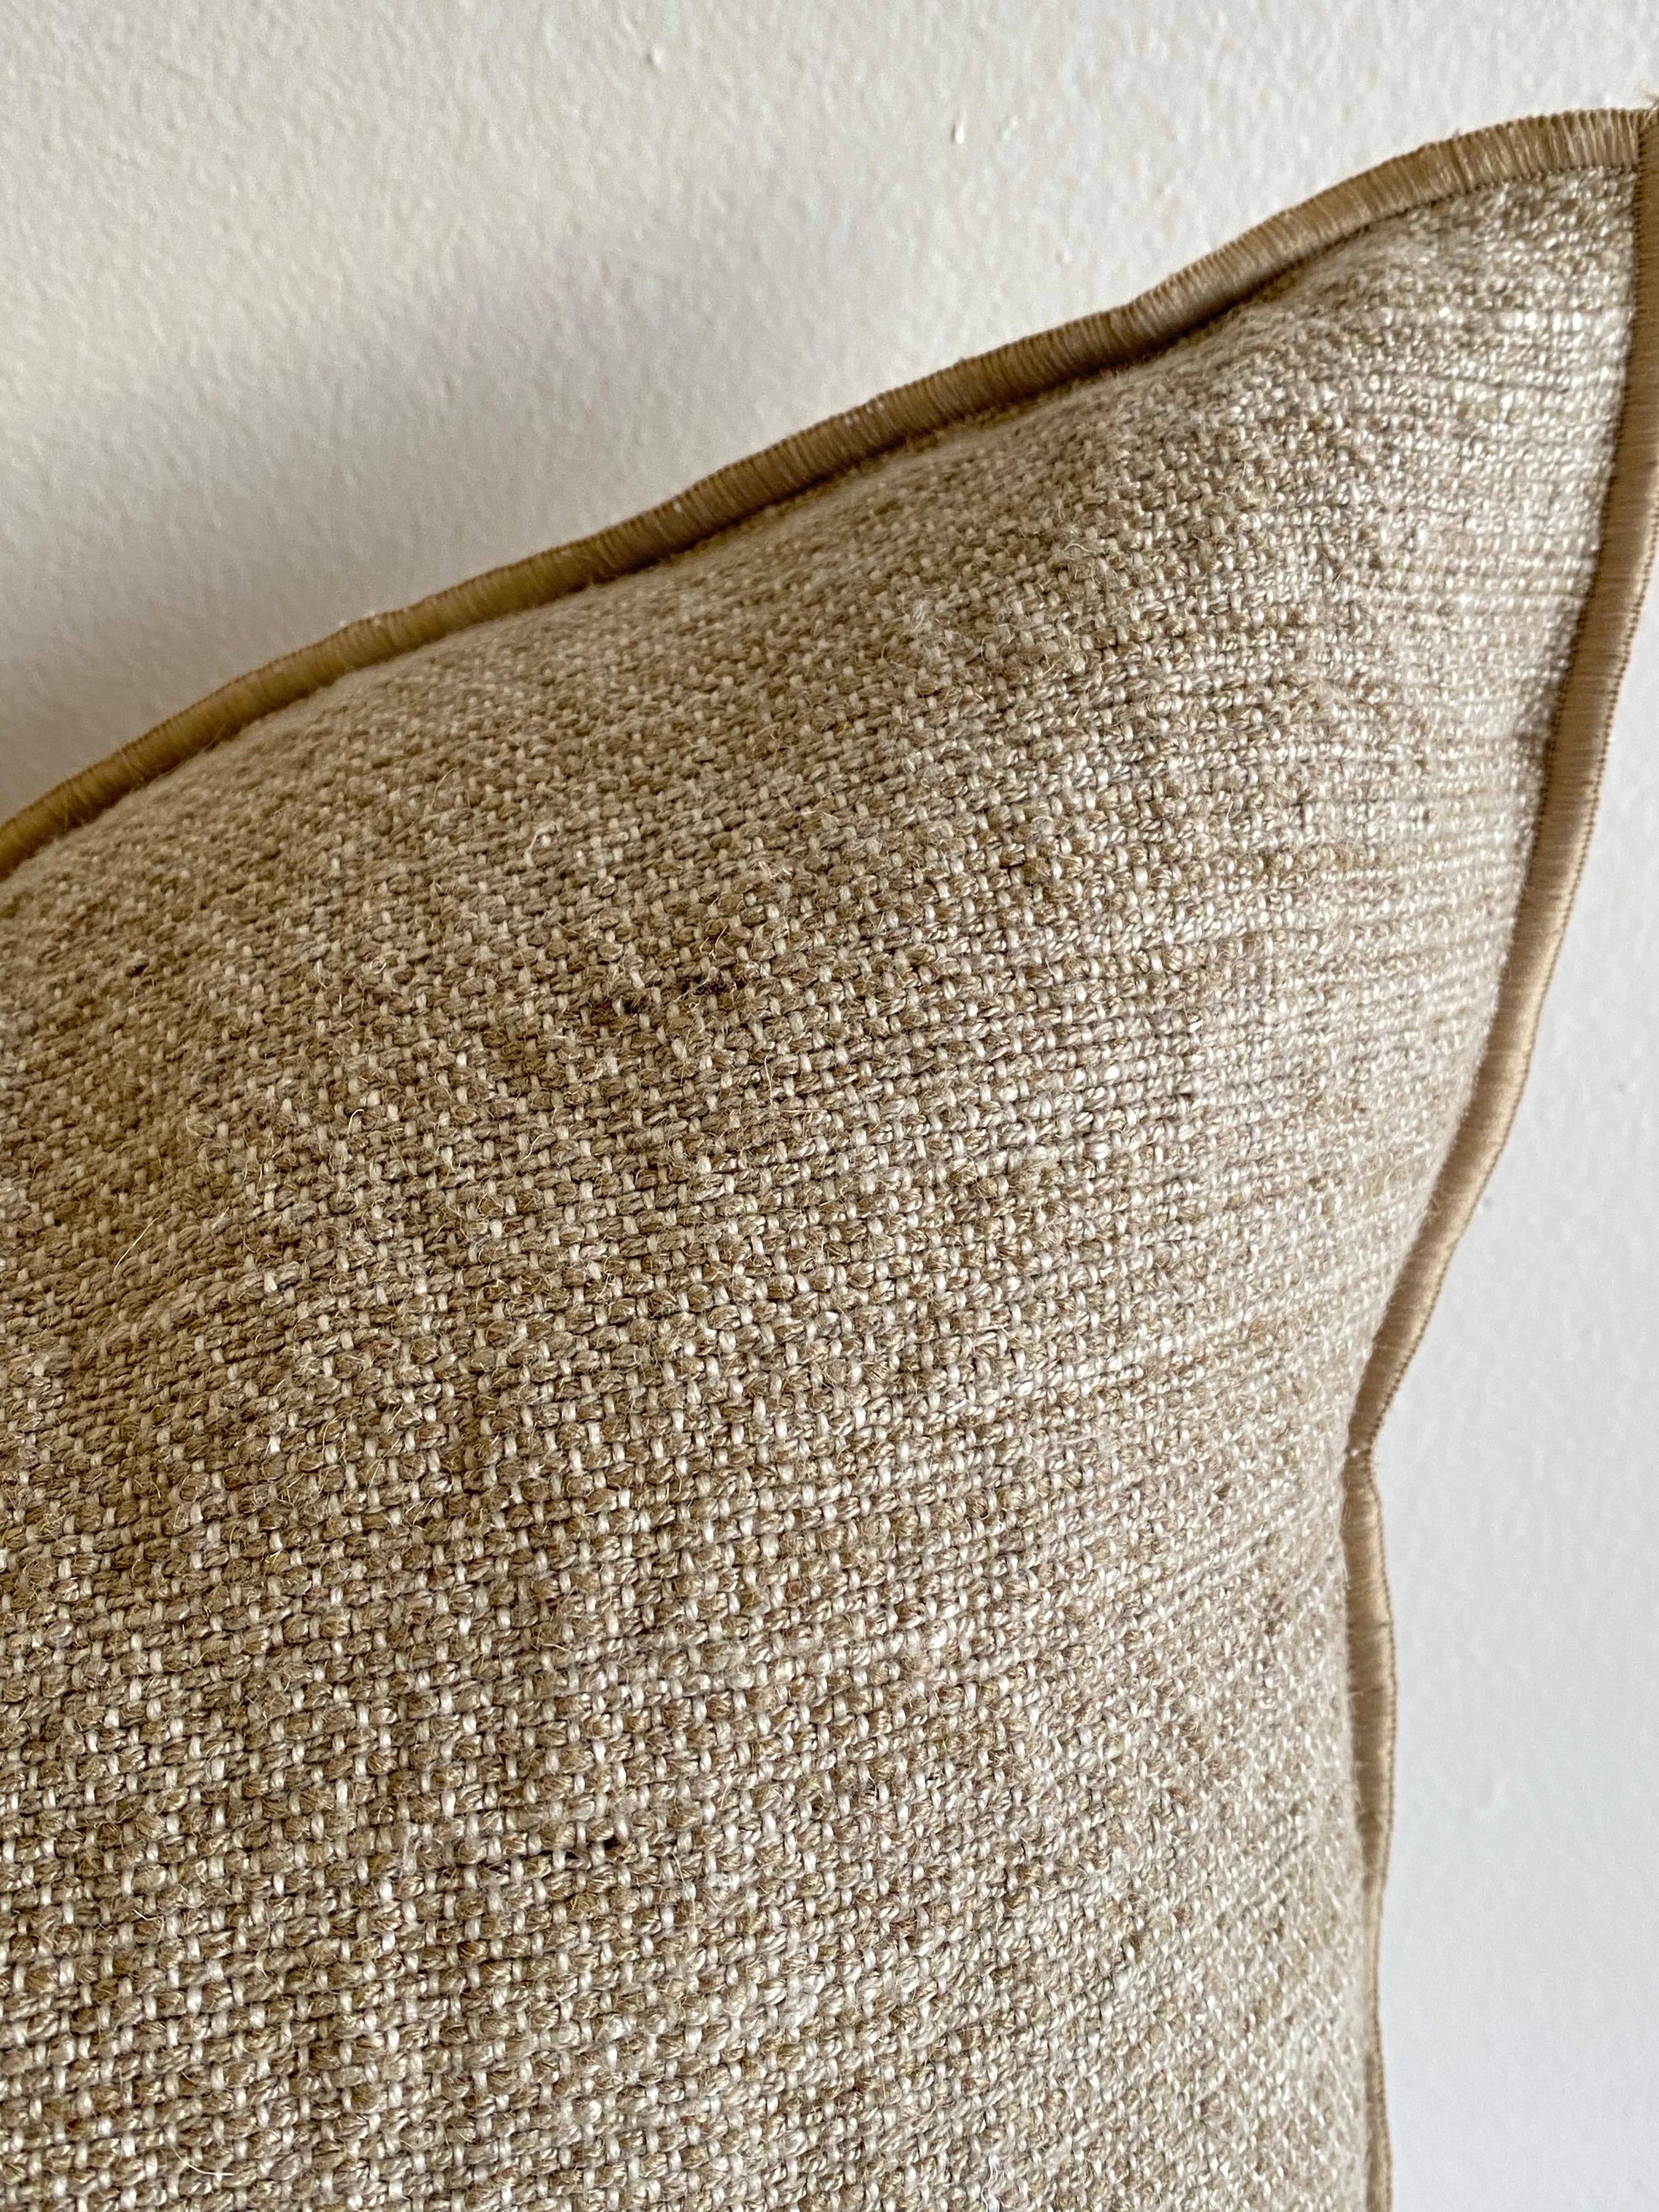 Custom linen and jute blend accent pillow with down insert
Color: natural
A medium flax natural colored nubby textured, soft, style pillow with a stitched edge, metal zipper closure.
Size 20